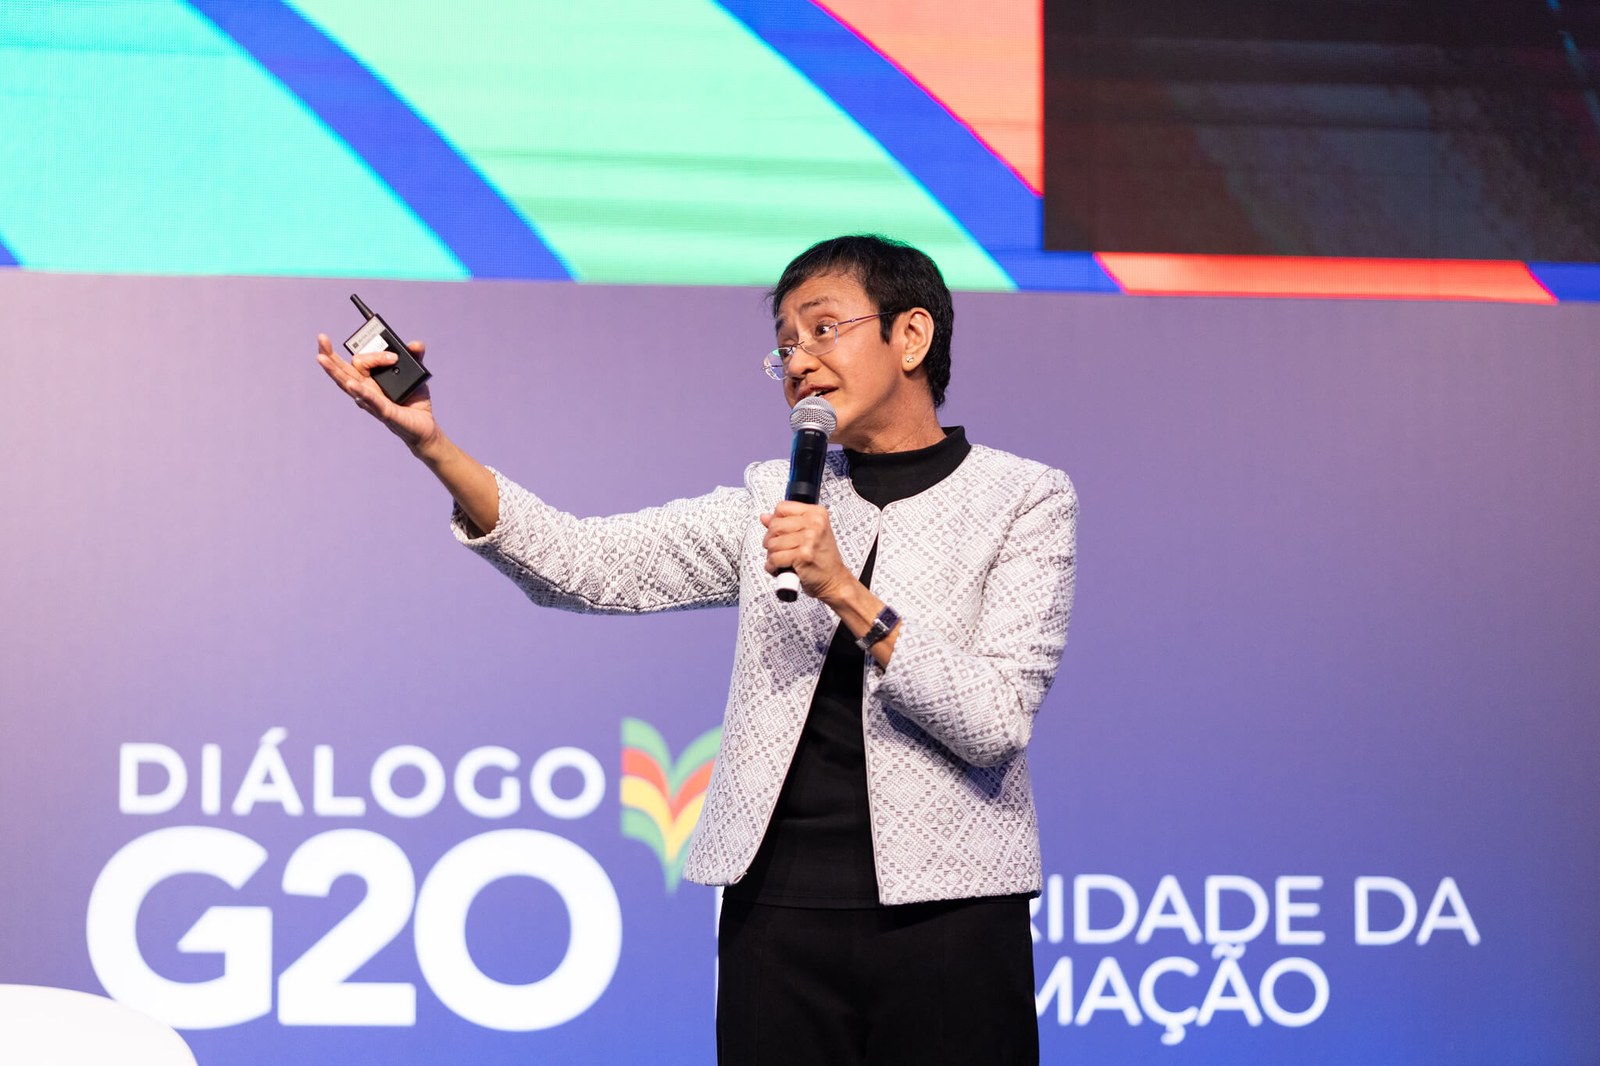 Maria Ressa underscored the importance of information integrity and advocated for the regulation of digital platforms to safeguard fundamental freedoms and uphold democracy| Photo: G20 Brasil Audiovisual